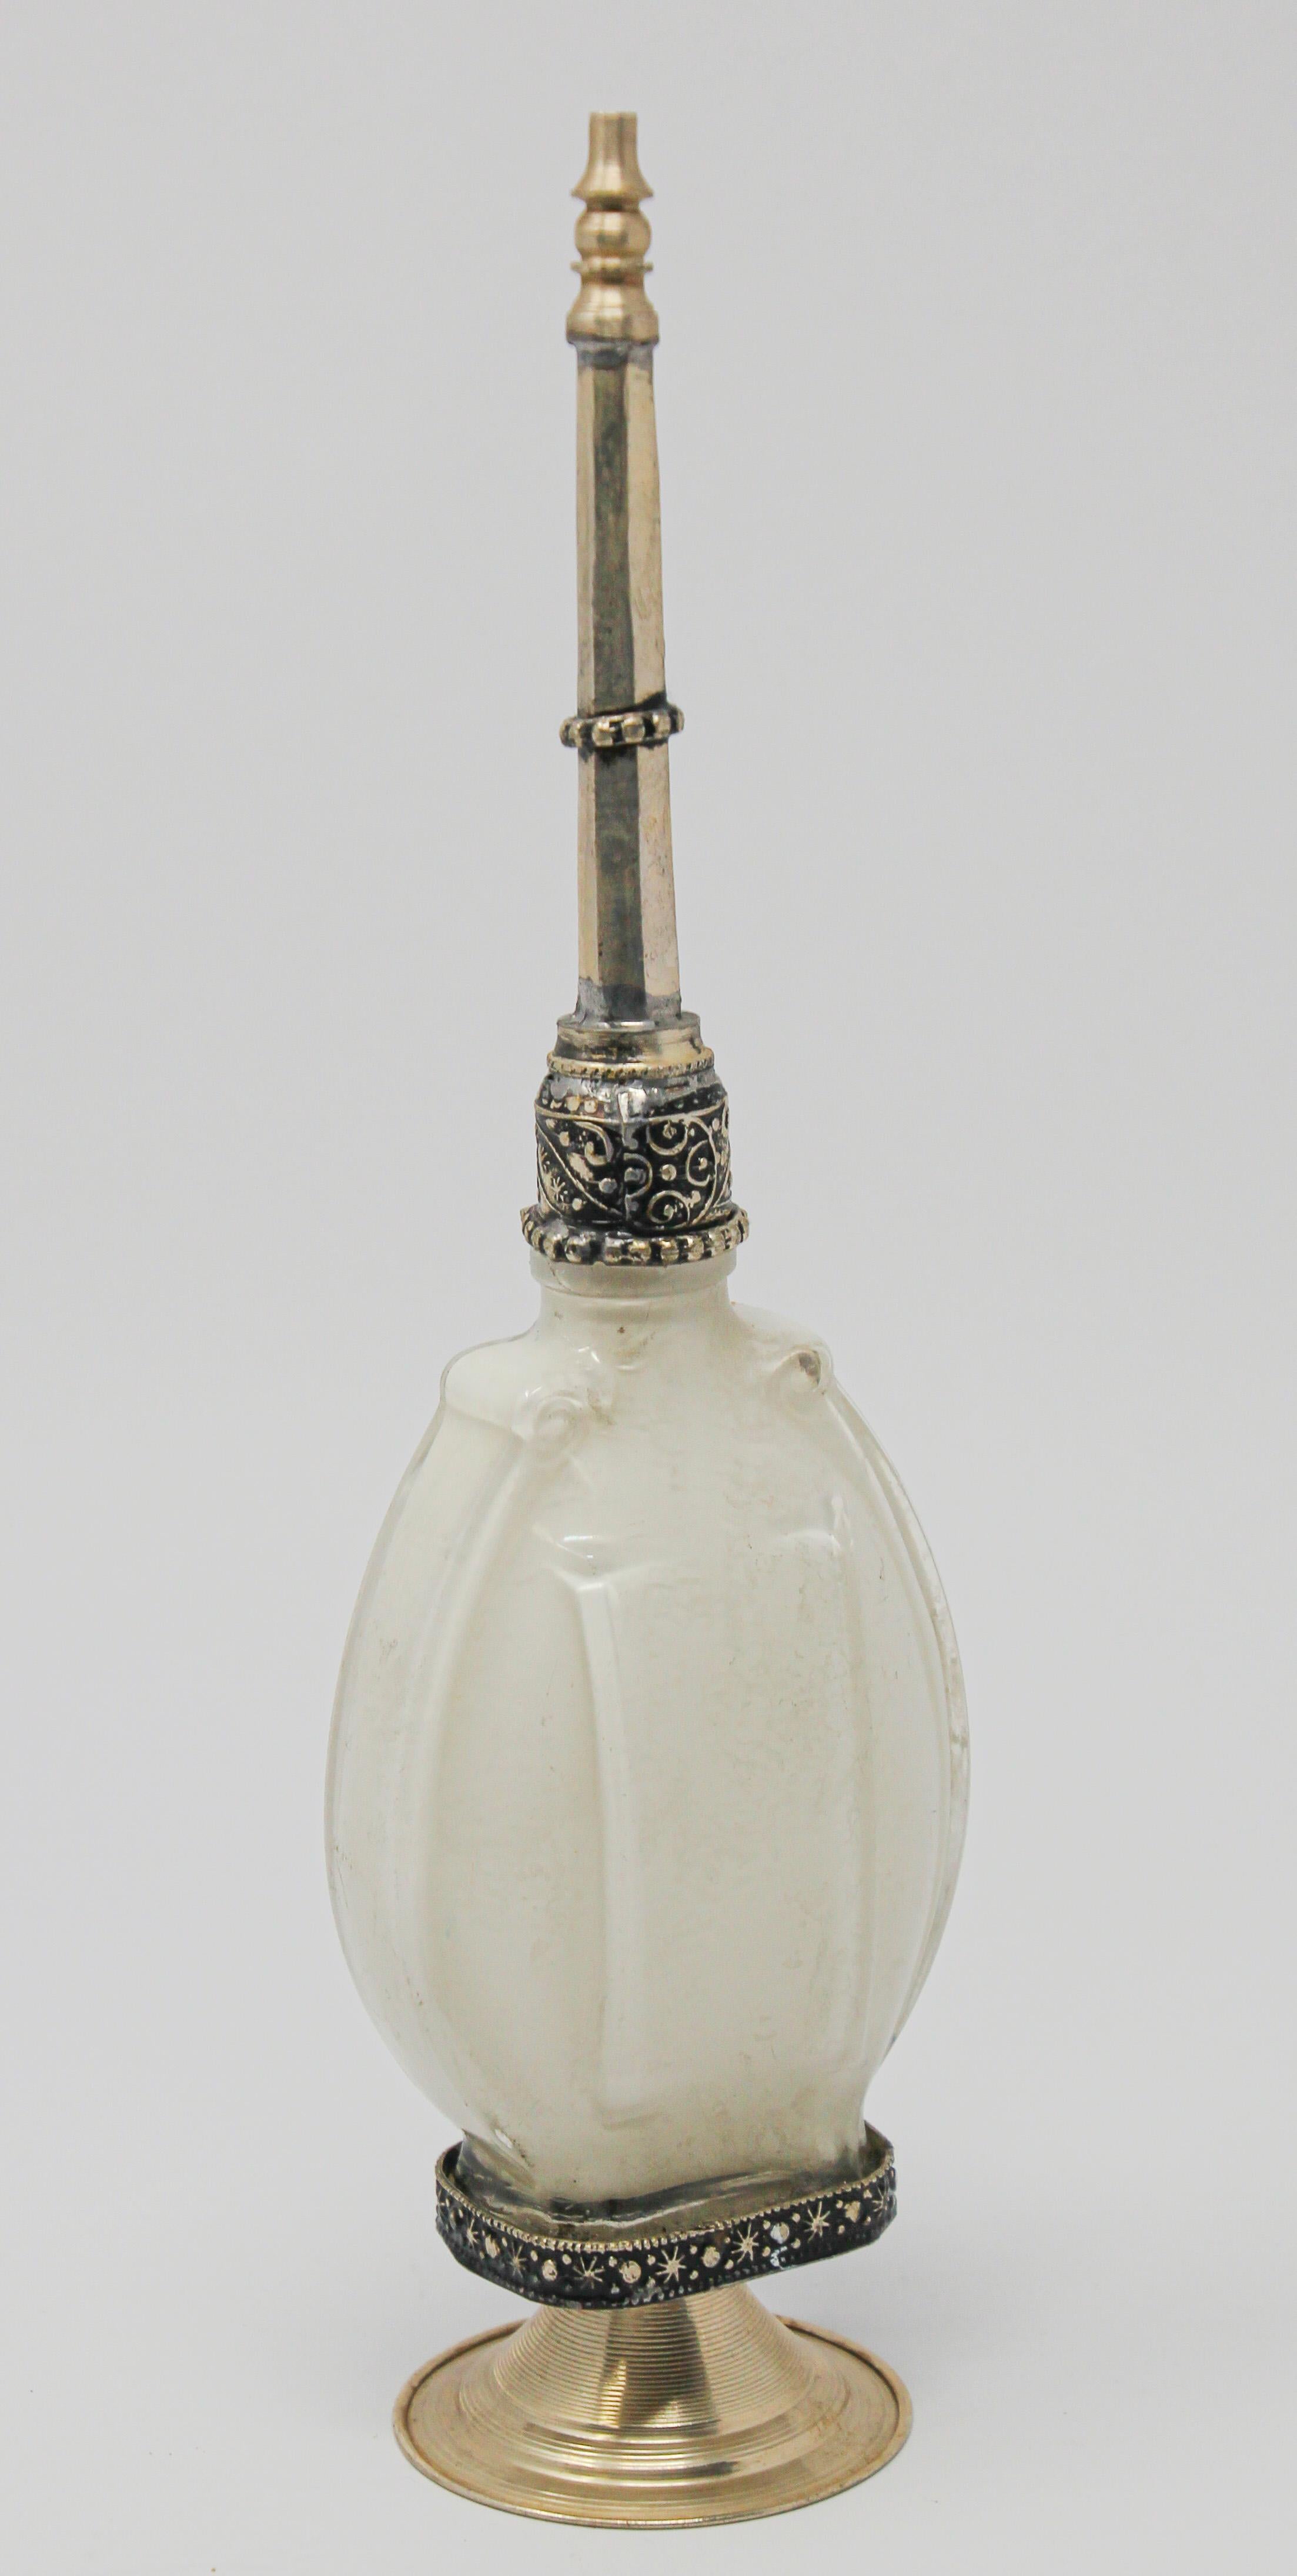 Handcrafted Moroccan Moorish white glass perfume bottle or rose water sprinkler with raised embossed silvered metal floral design over amber glass.
The pressed glass bottle in Art Deco, Art Nouveau style is oval shape with curved sides and hand